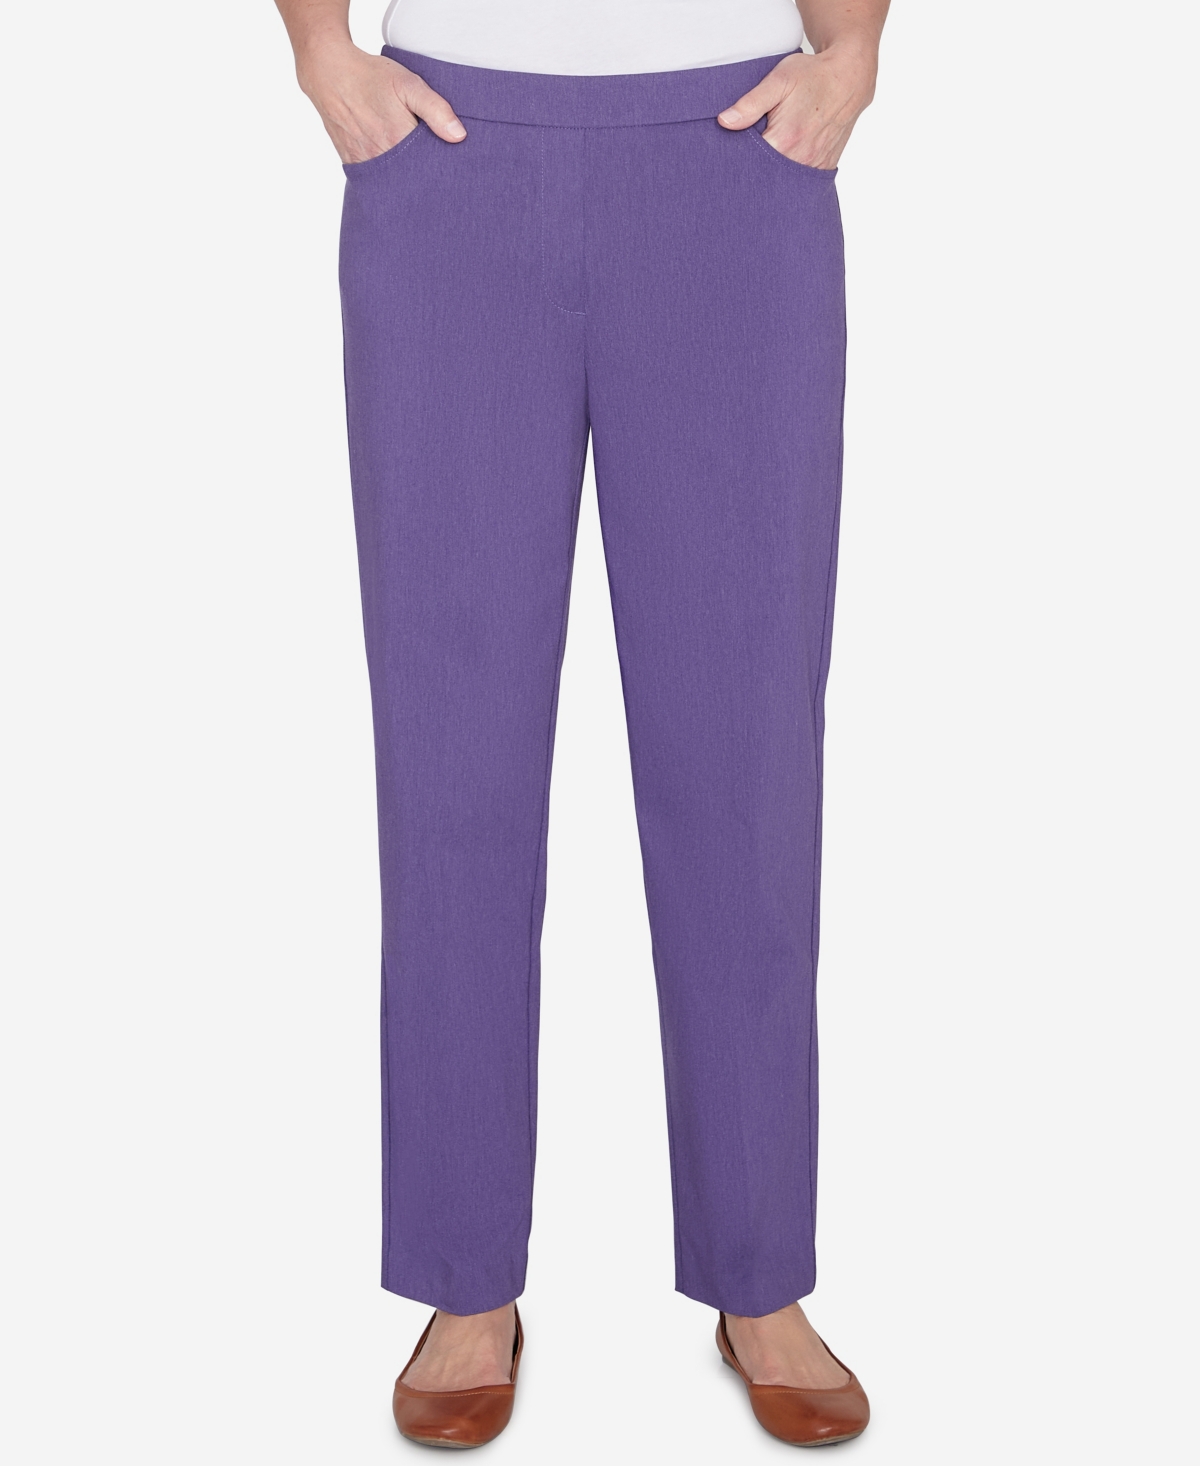 Shop Alfred Dunner Petite Charm School Pull On Classic Charmed Pant, Petite & Petite Short In Iris